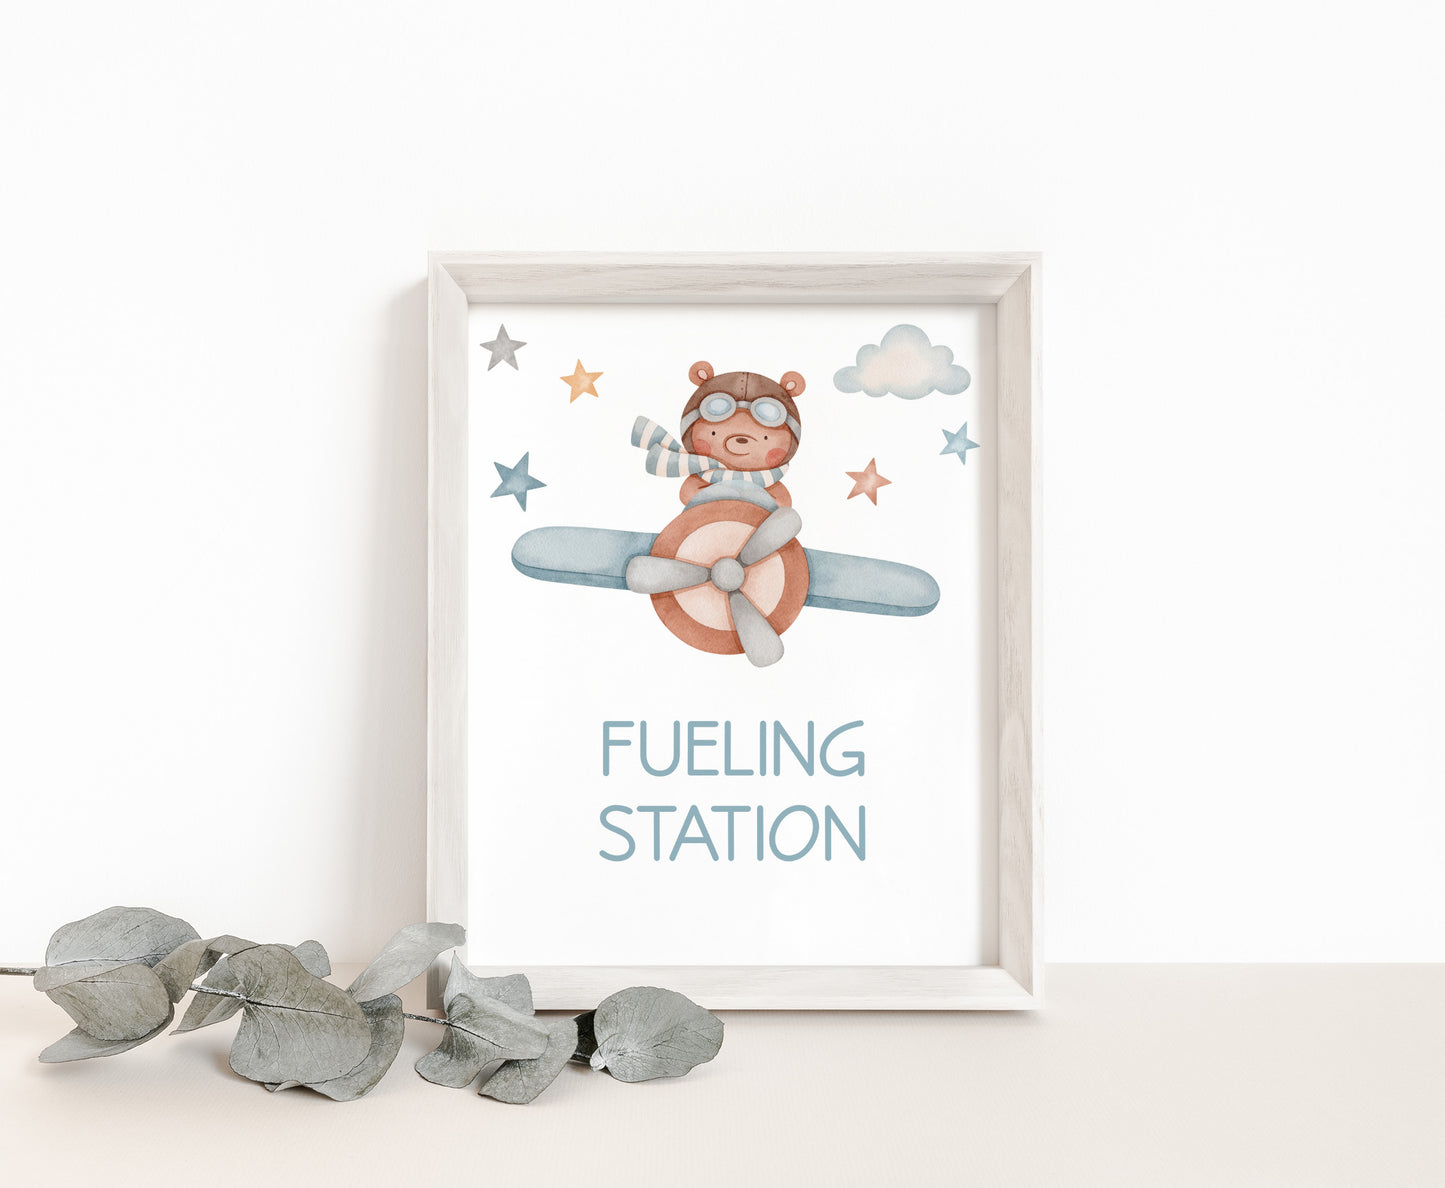 Fueling station Airplane Table Sign Printable | Aviator party Decoration - 76C